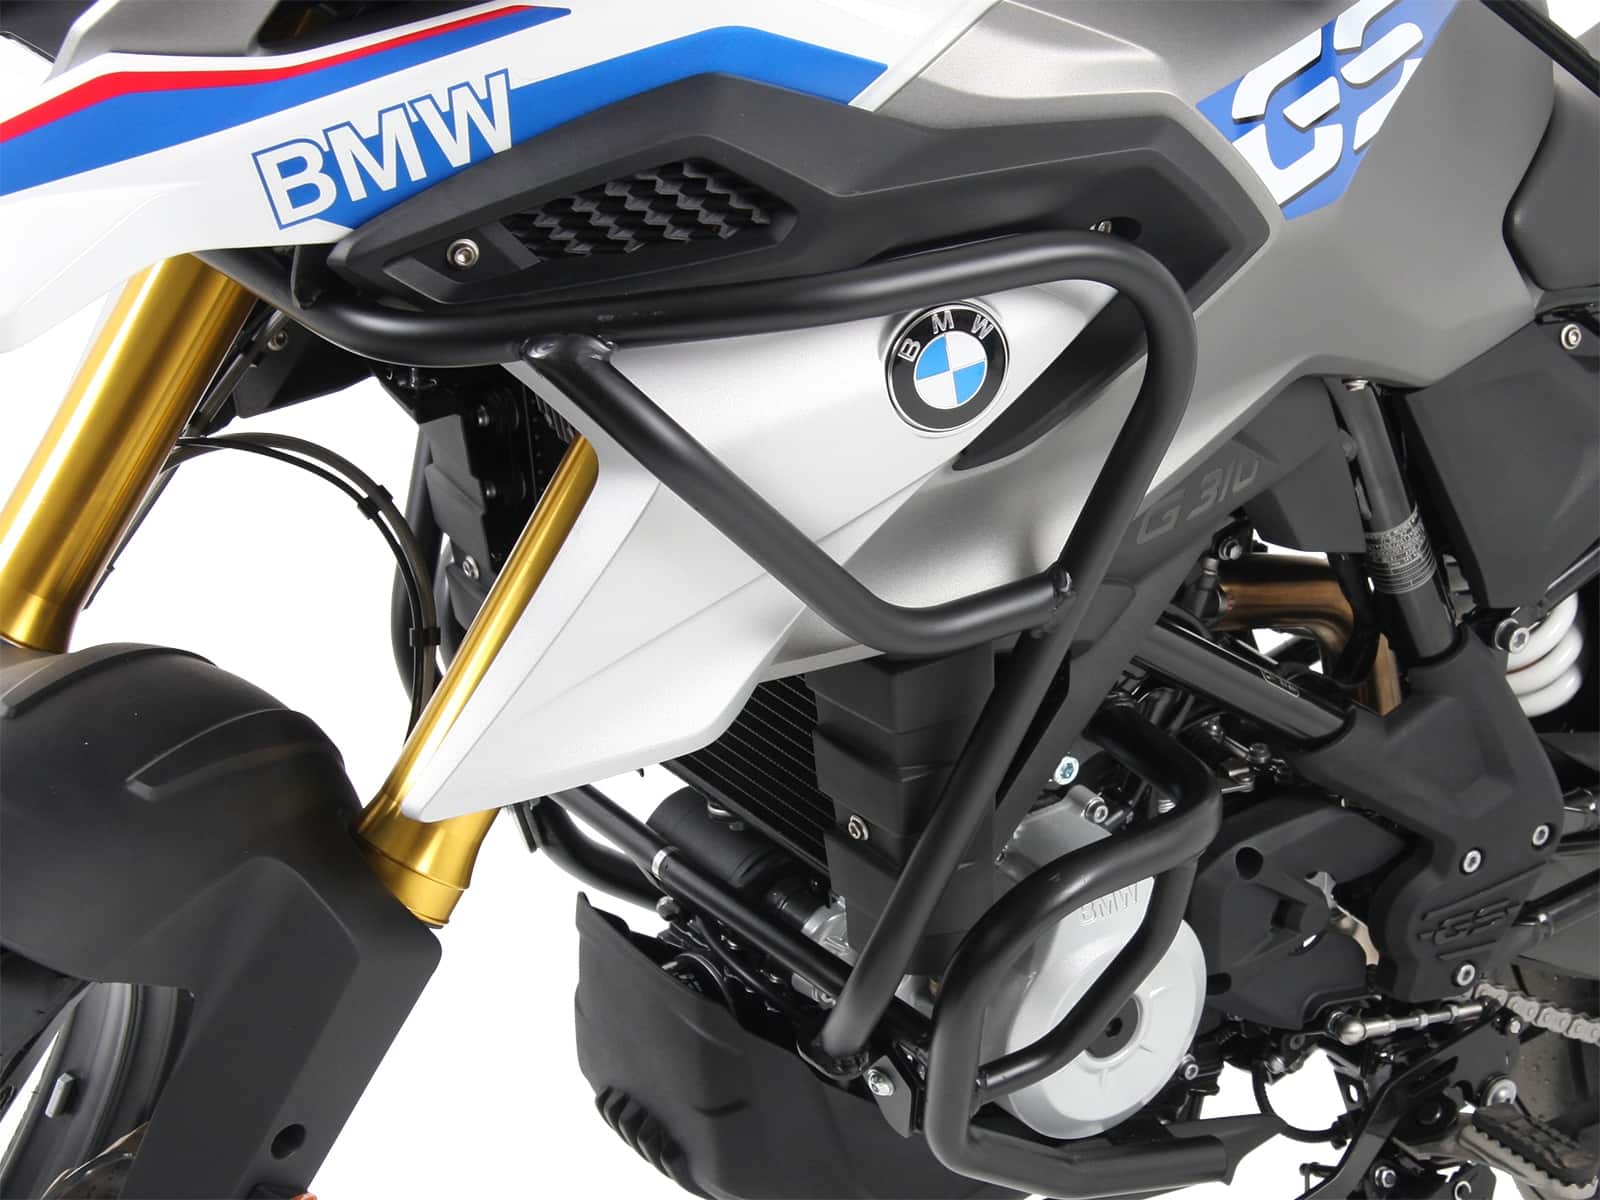 Tankguard black for combination with lower engine crash bar 5016507 for BMW G 310 GS (2017-)